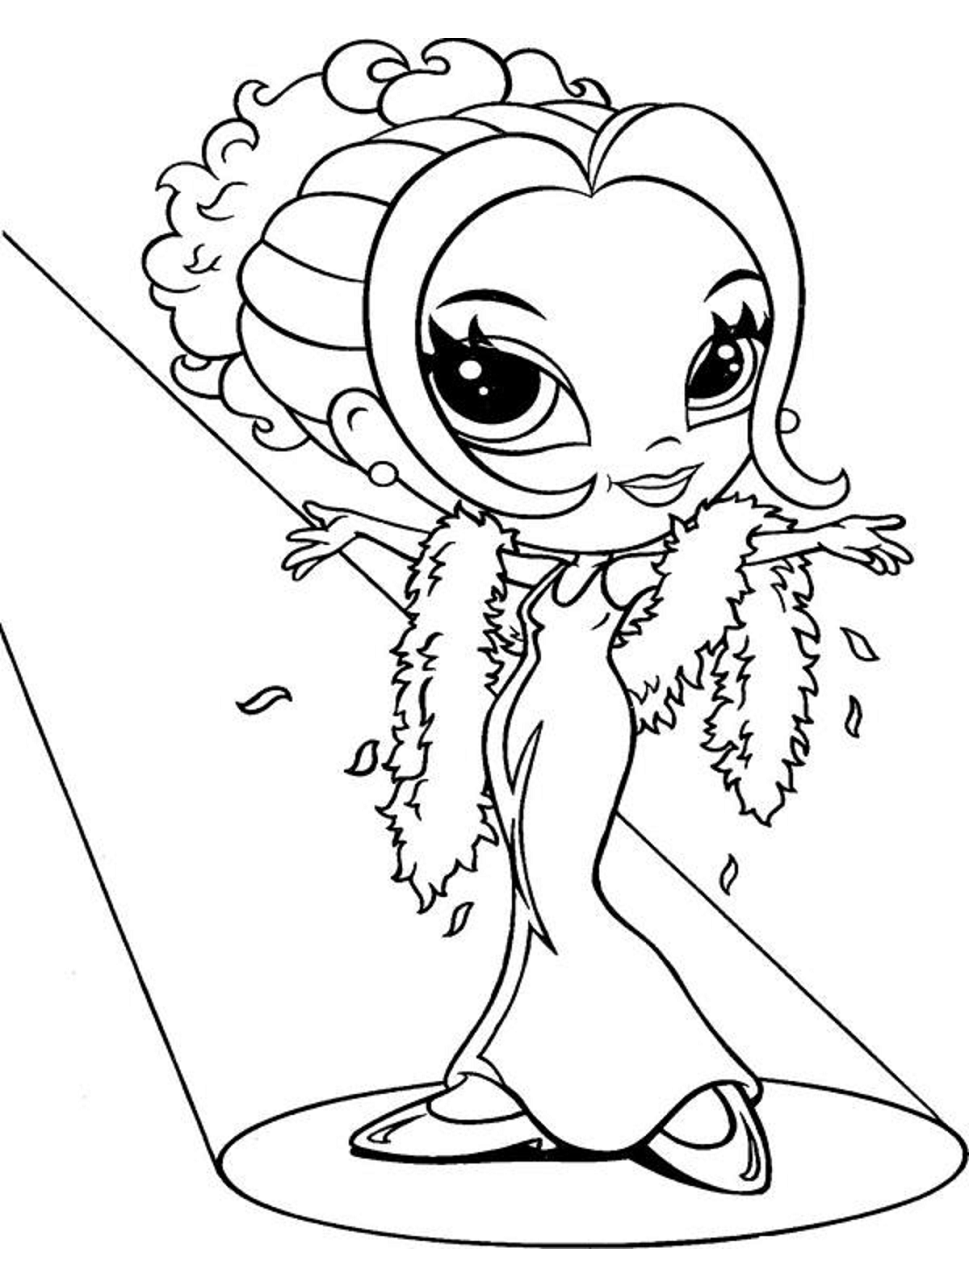 Lisa Frank Coloring Page by TallyBaby13 on DeviantArt